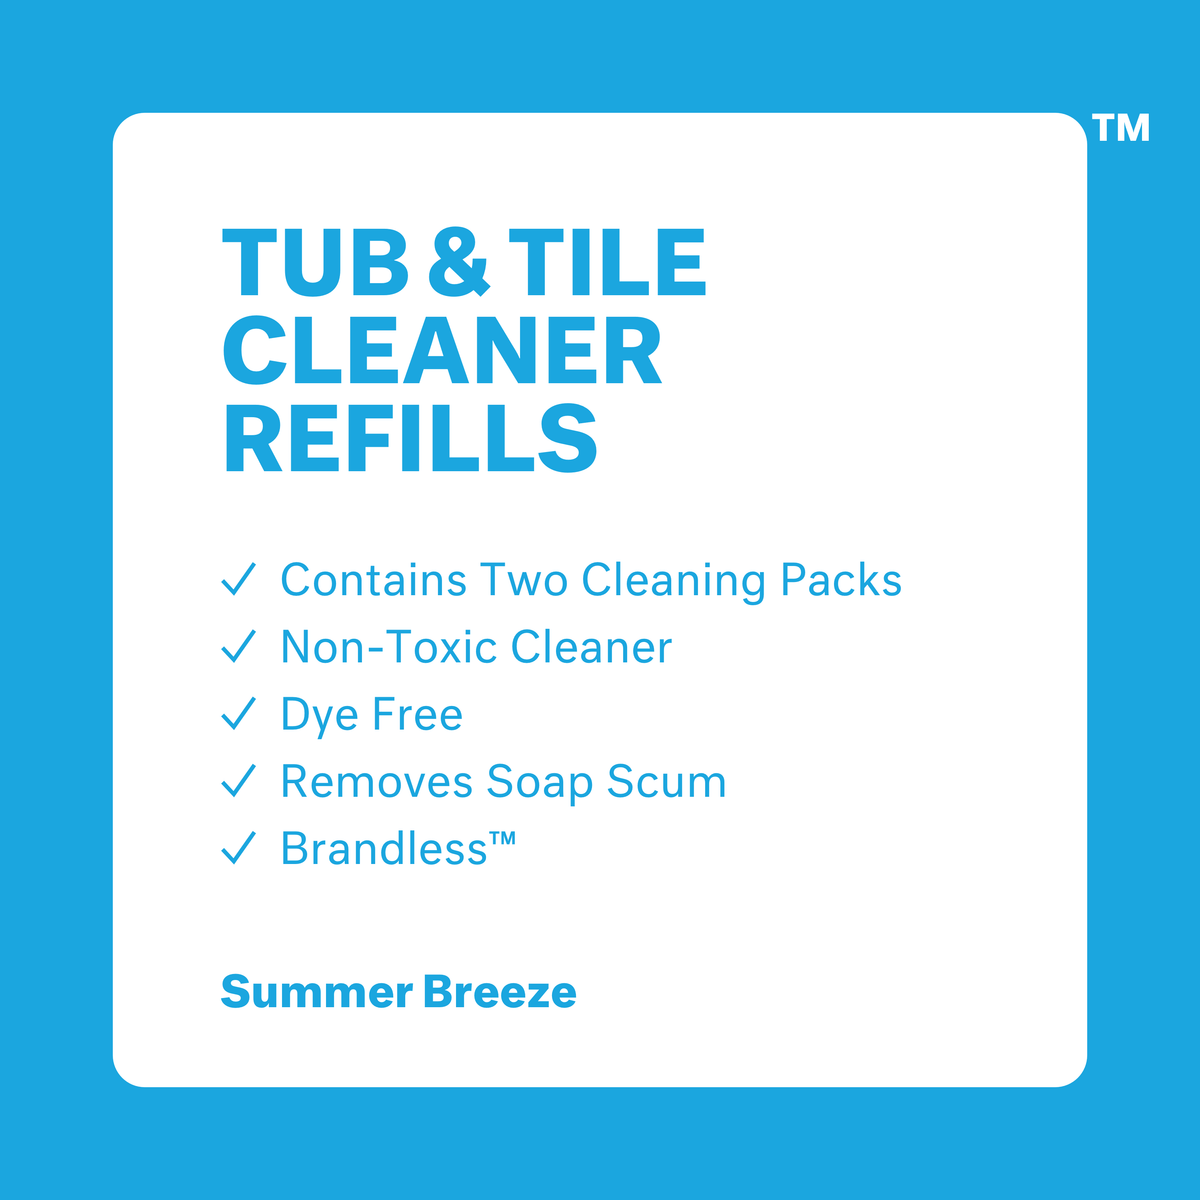 Tub and tile cleaner refills: includes two cleaning packs, non-toxic cleaner, dye free, removes soap scum, brandless. Summer breeze scent.